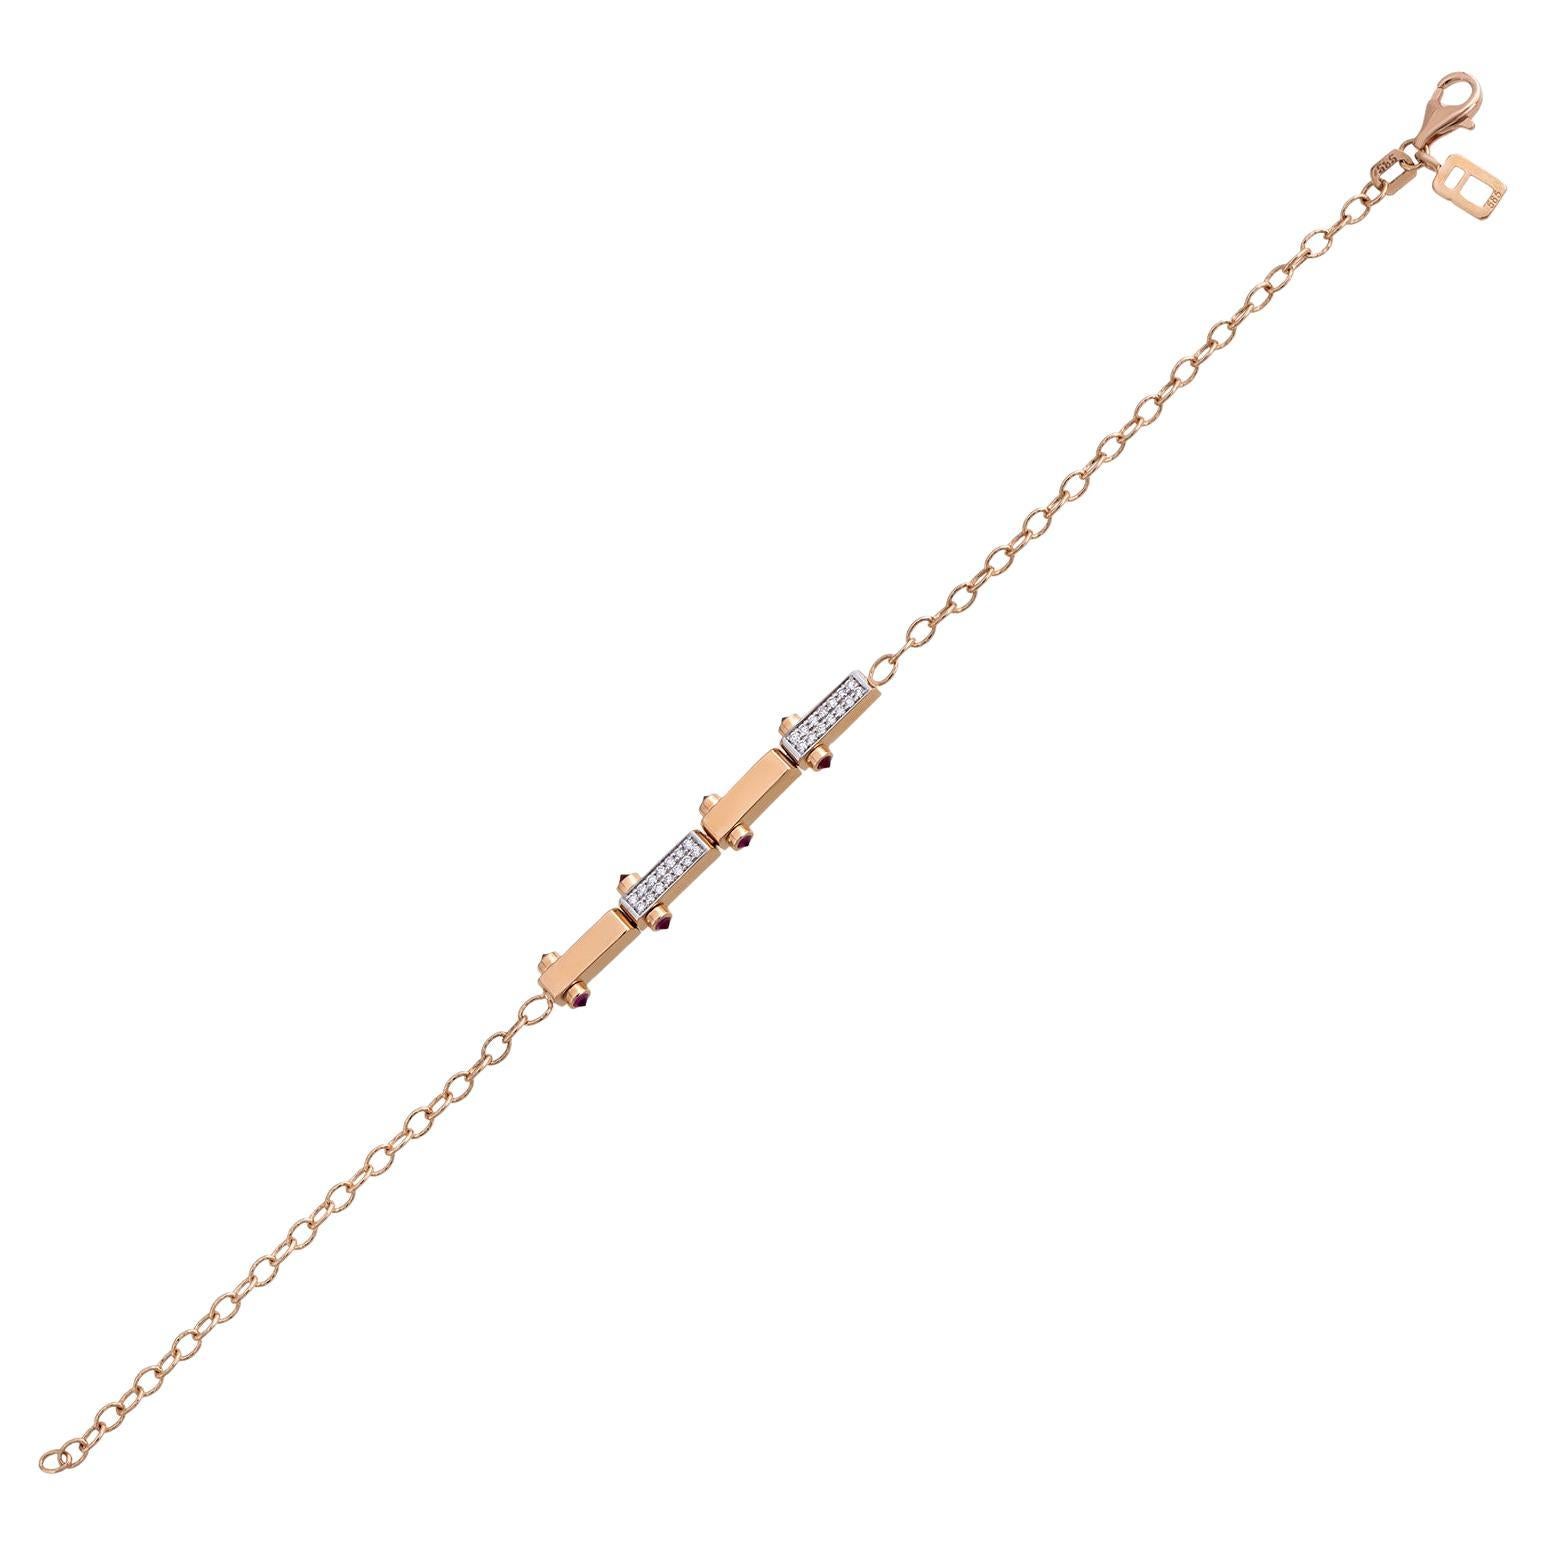 Baguette Jewellery 14K Rose Gold Bar Bracelet with Diamonds and Ruby Cabochon For Sale